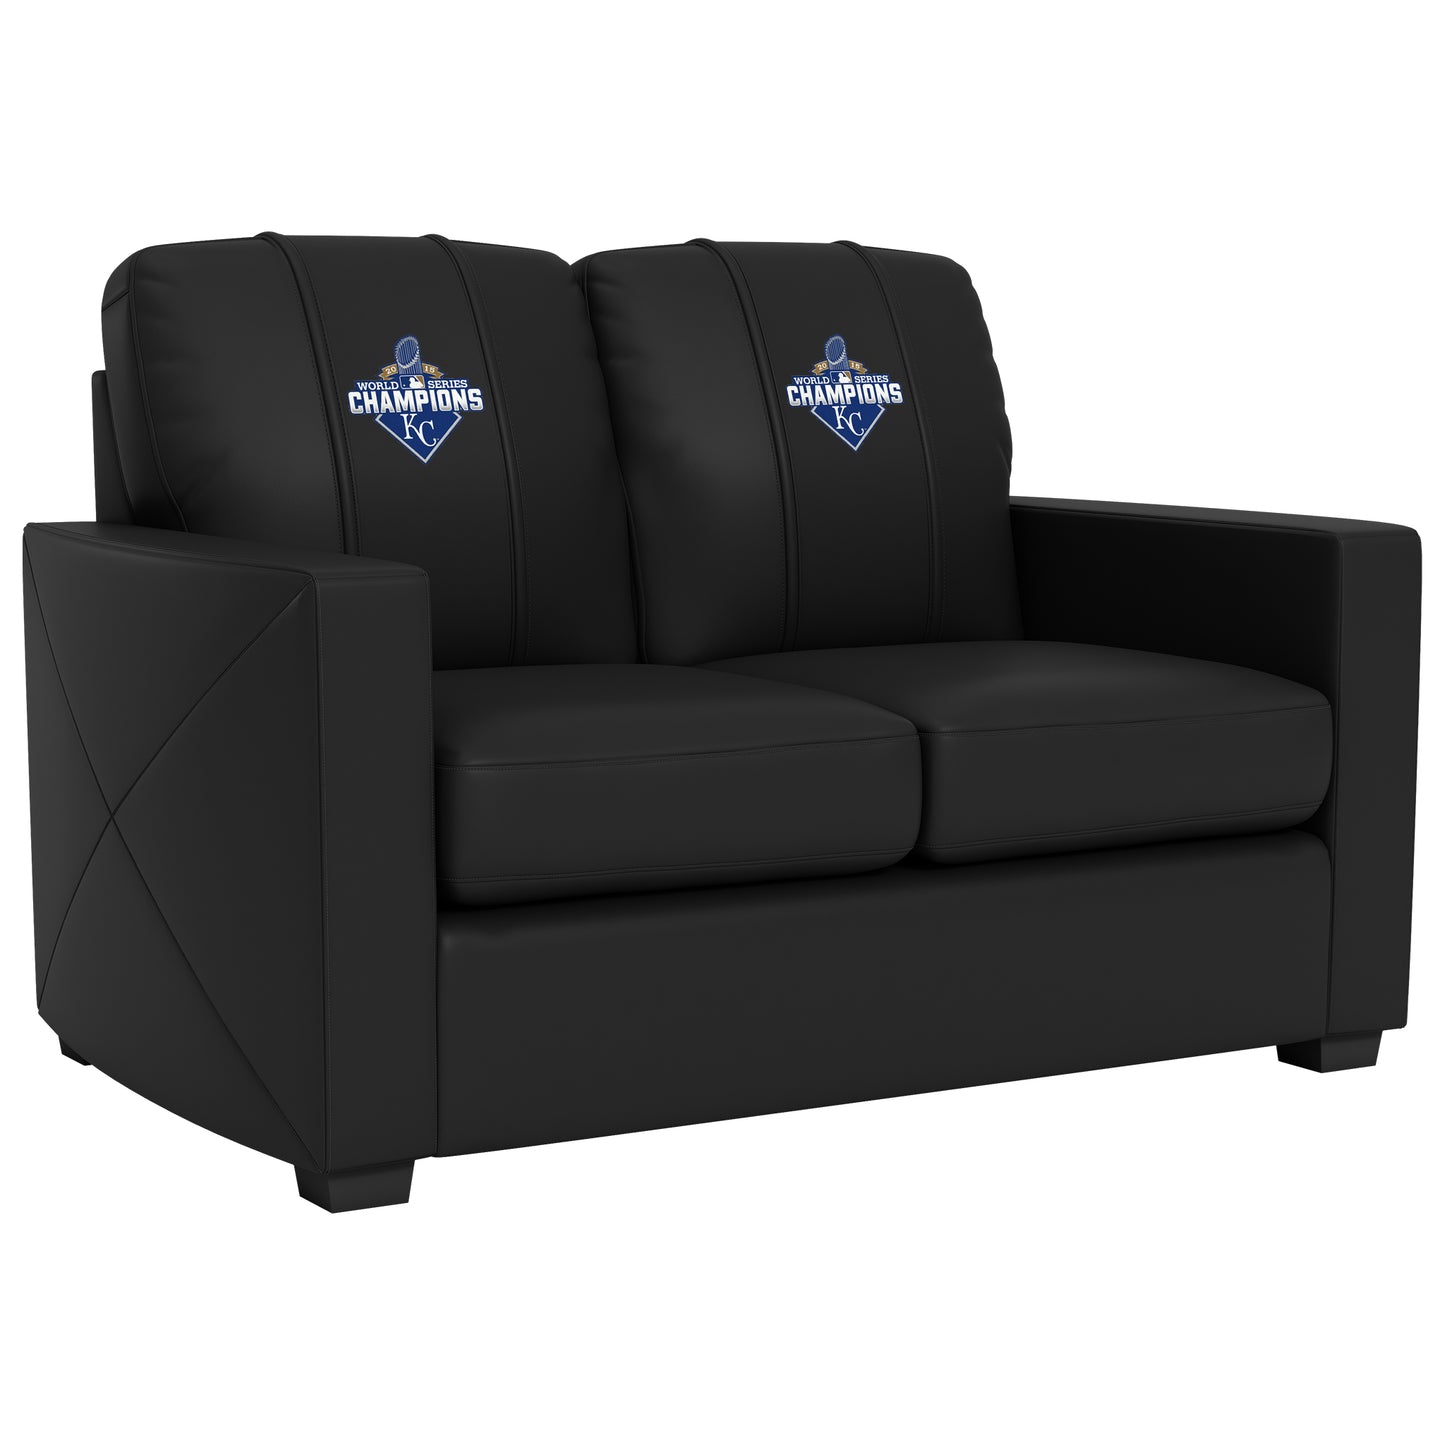 Silver Loveseat with Kansas City Royals 2015 Champions